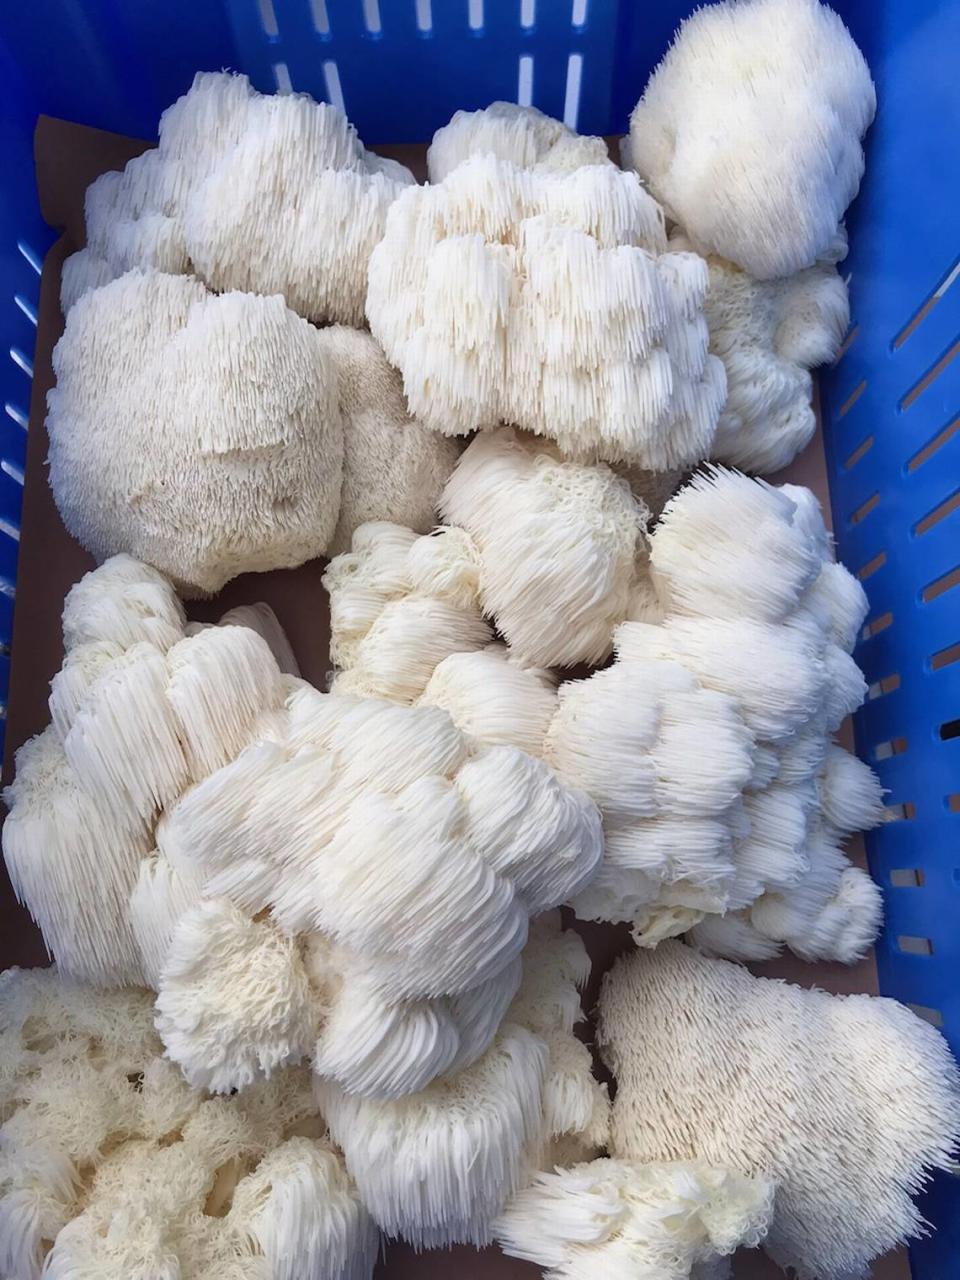 Mushrooms on Main grows and sells these lion’s mane mushrooms, among other exotic varieties of fungi.